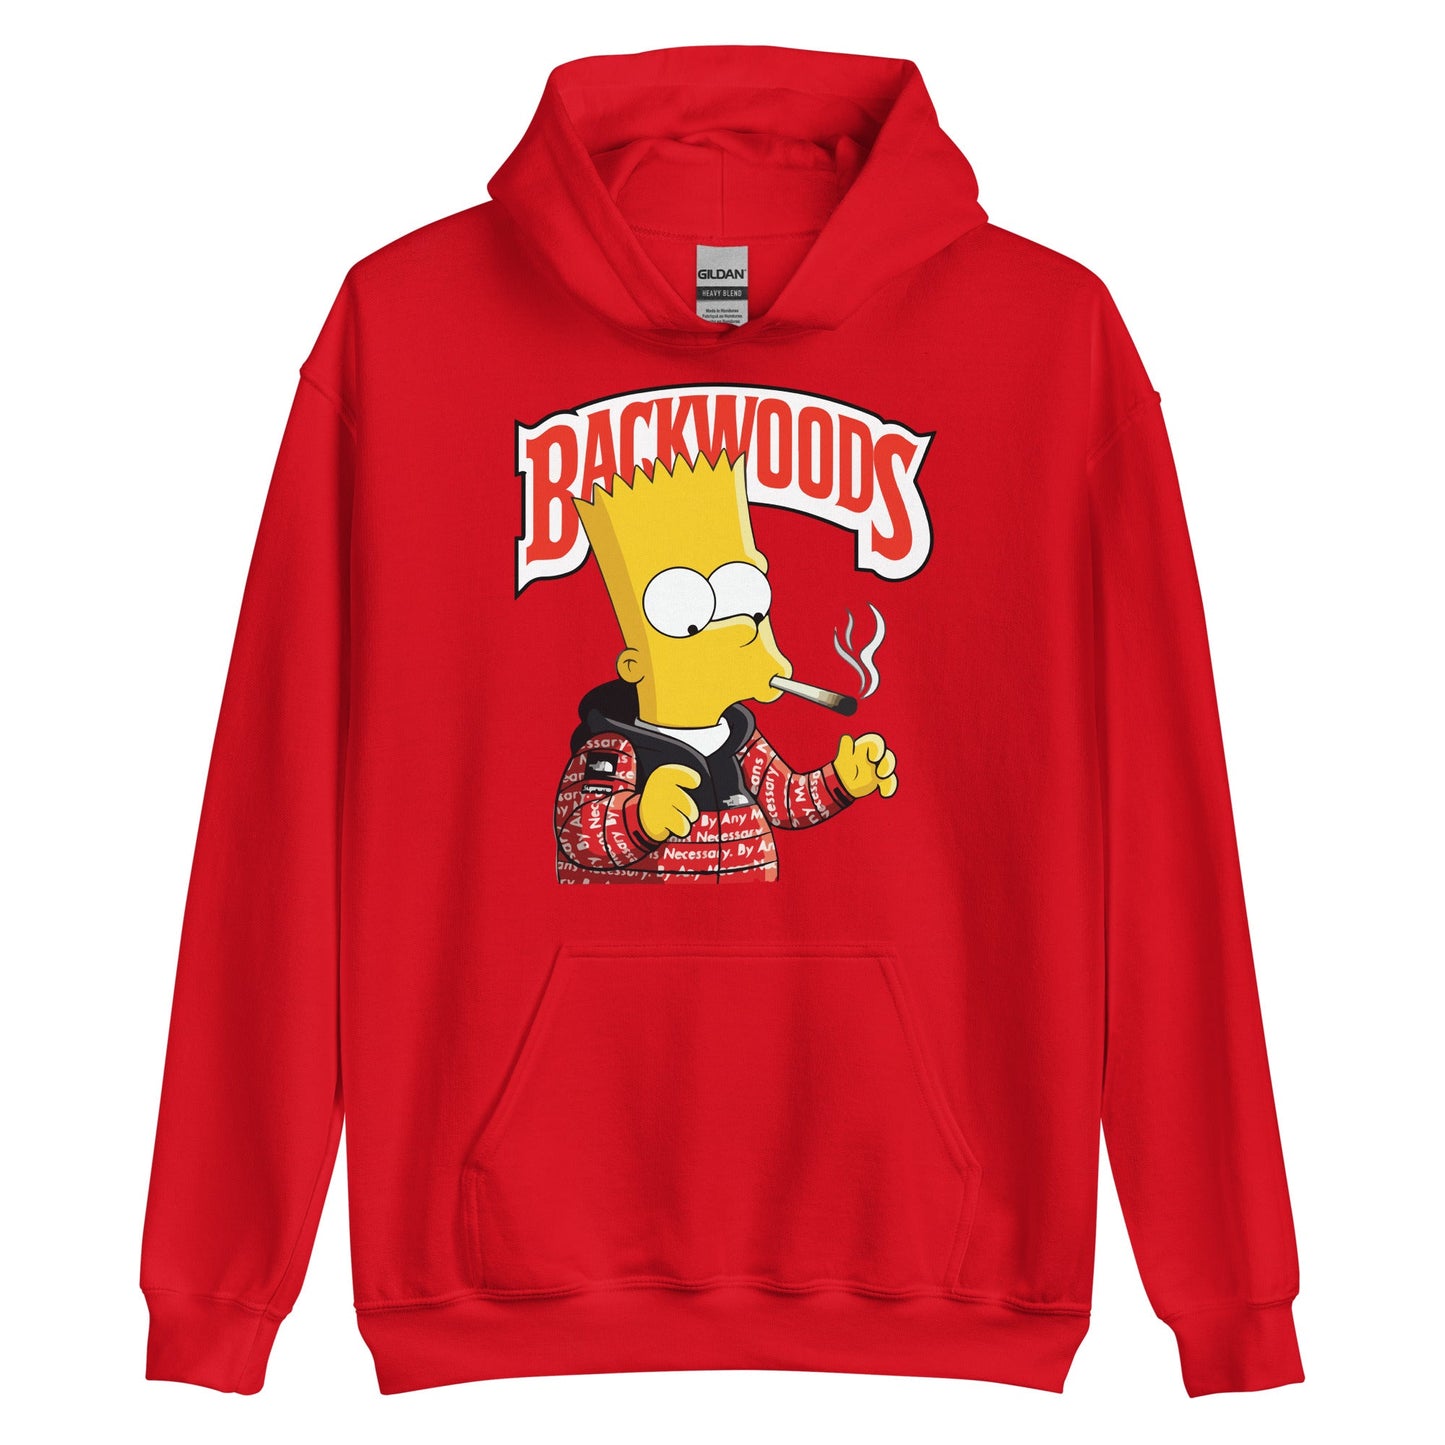 backwood simpson hoodie - The Truth Graphics